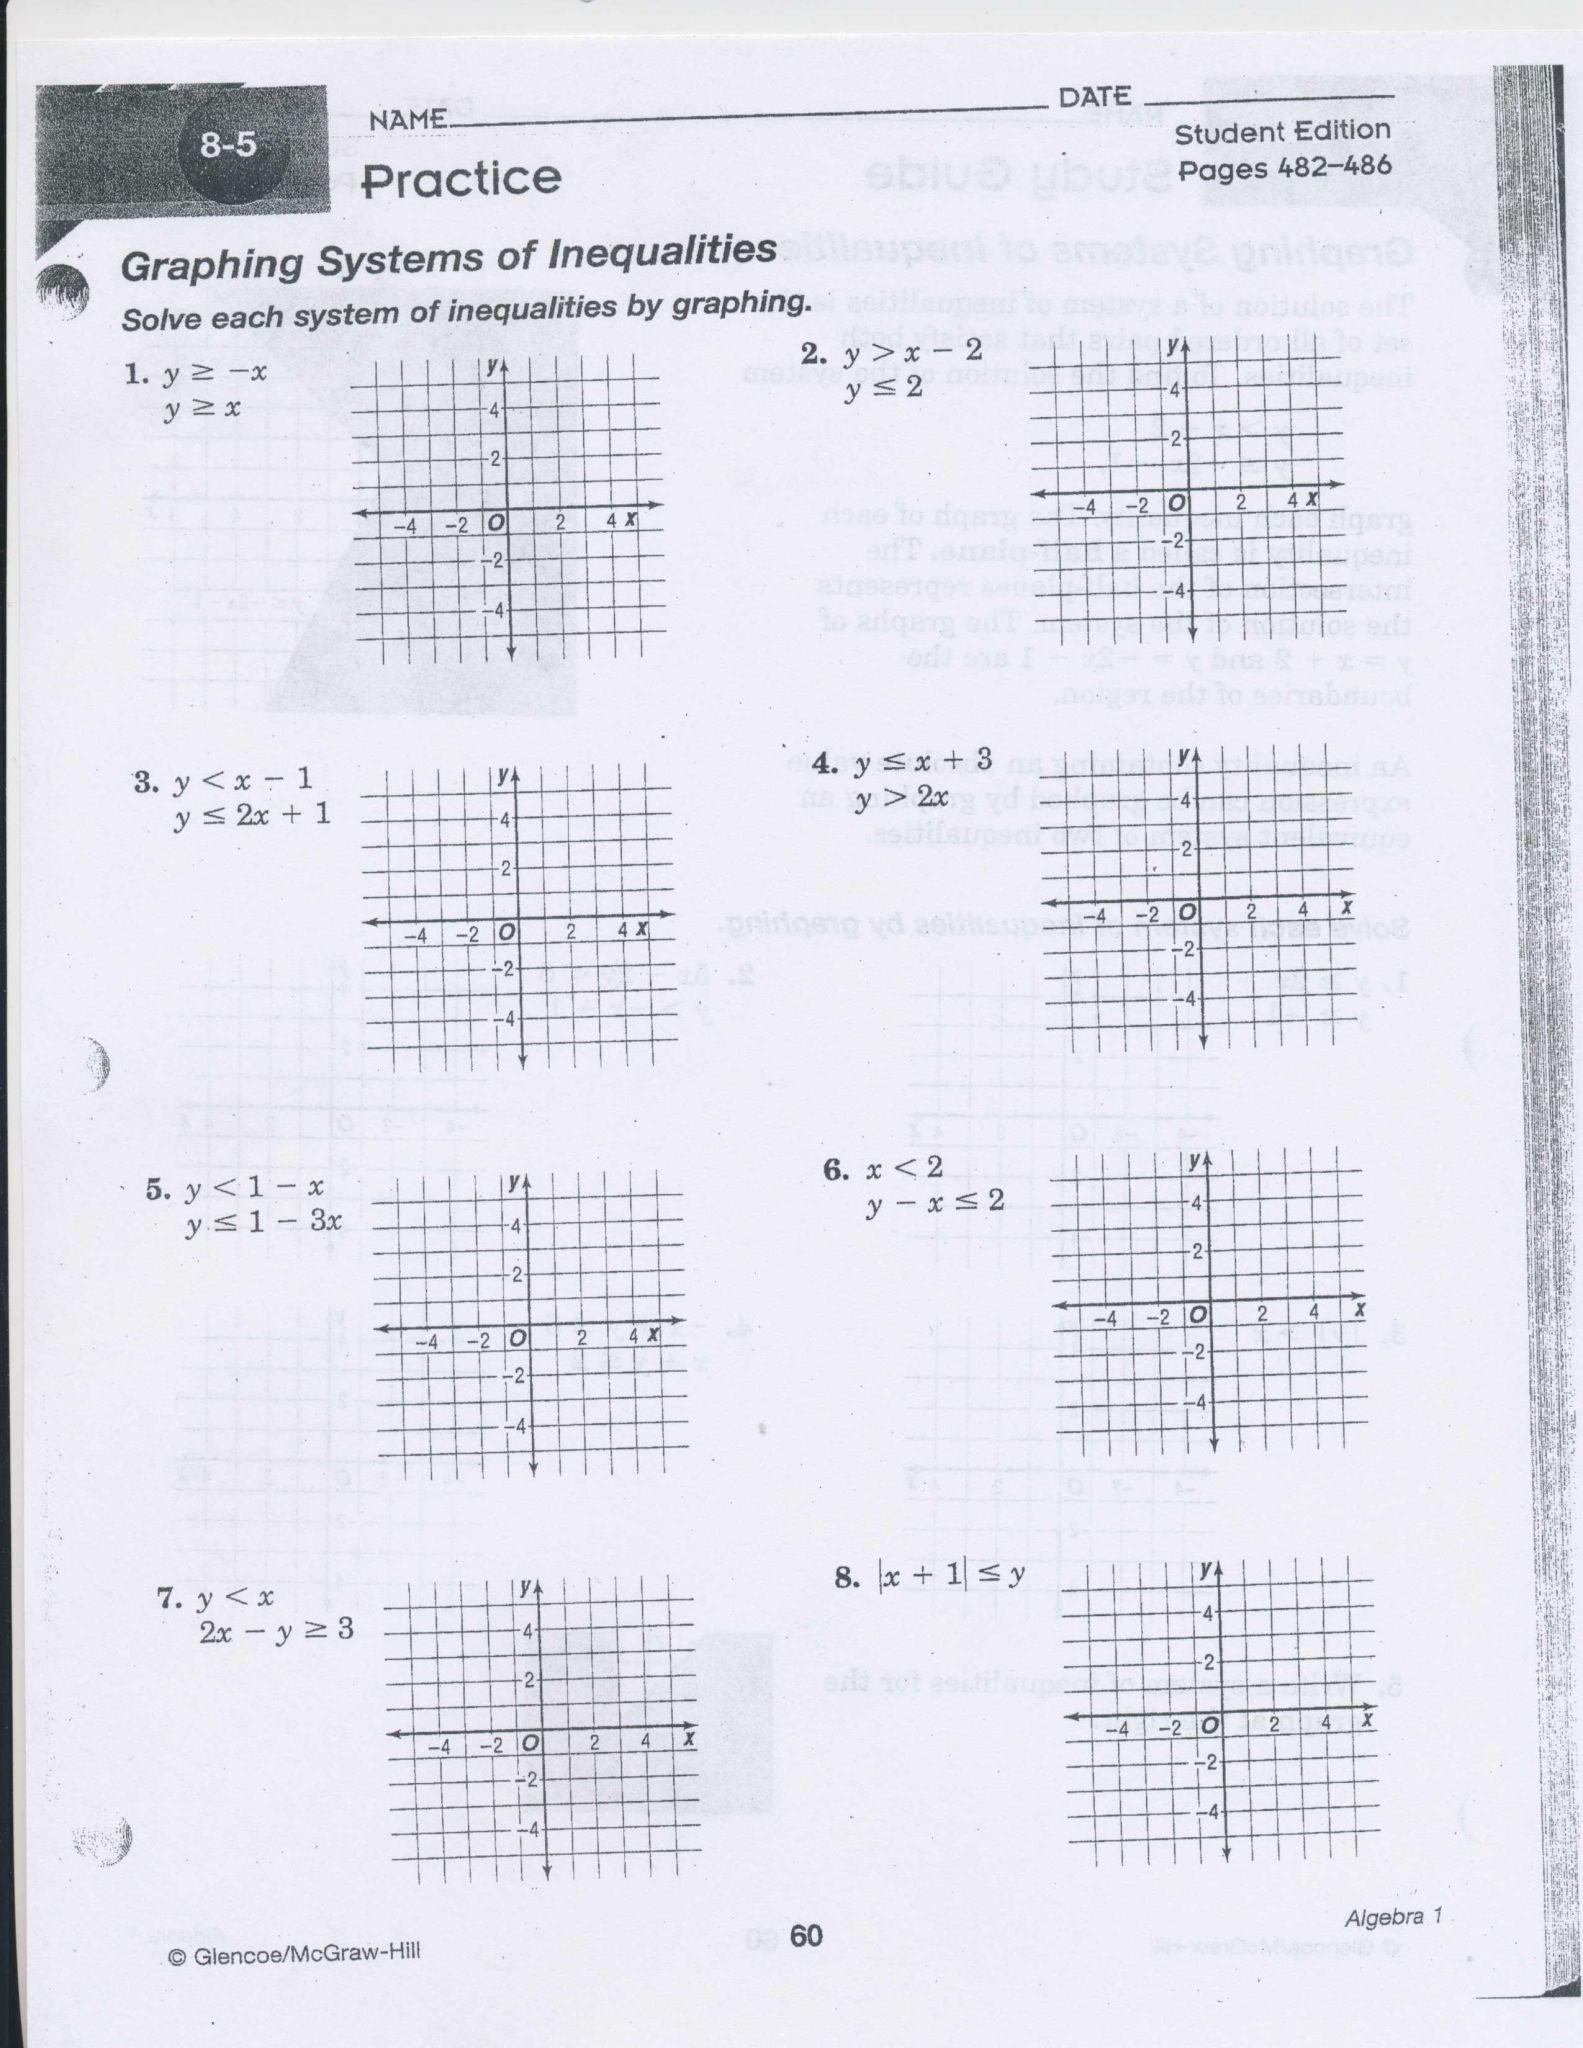 Solving and Graphing Inequalities Worksheet Answer Key as Well as solving Systems Equations by Graphing Worksheet Answers Beautiful